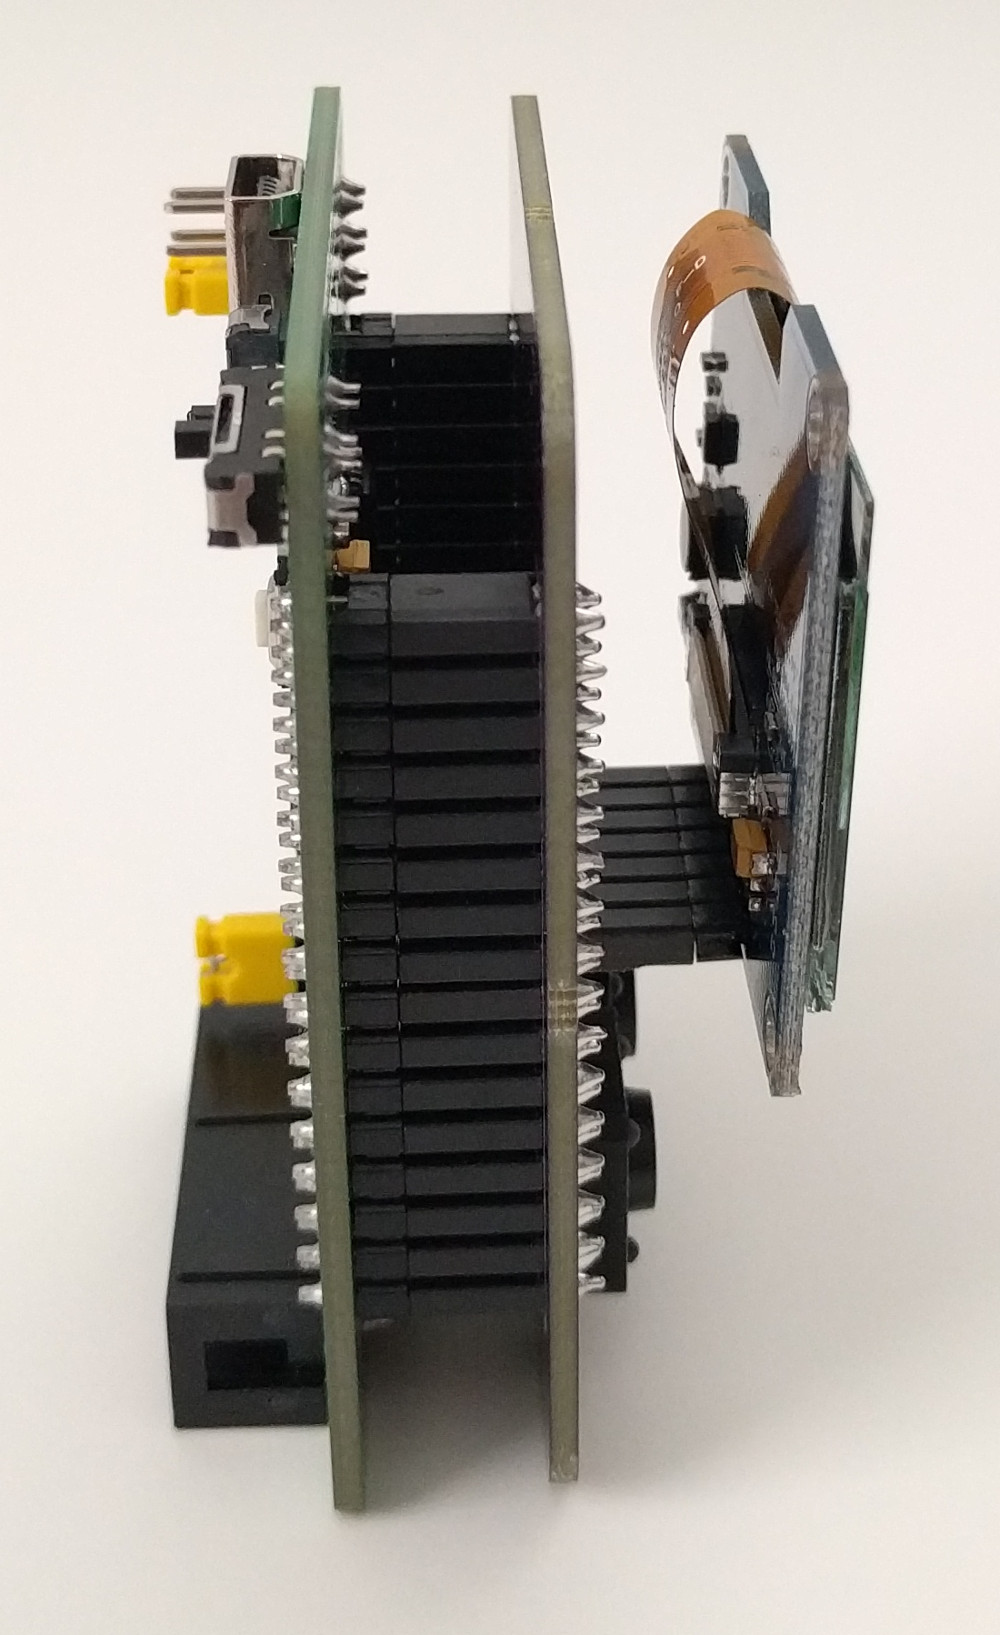 Side view, PWB and display module stacked on the dev board